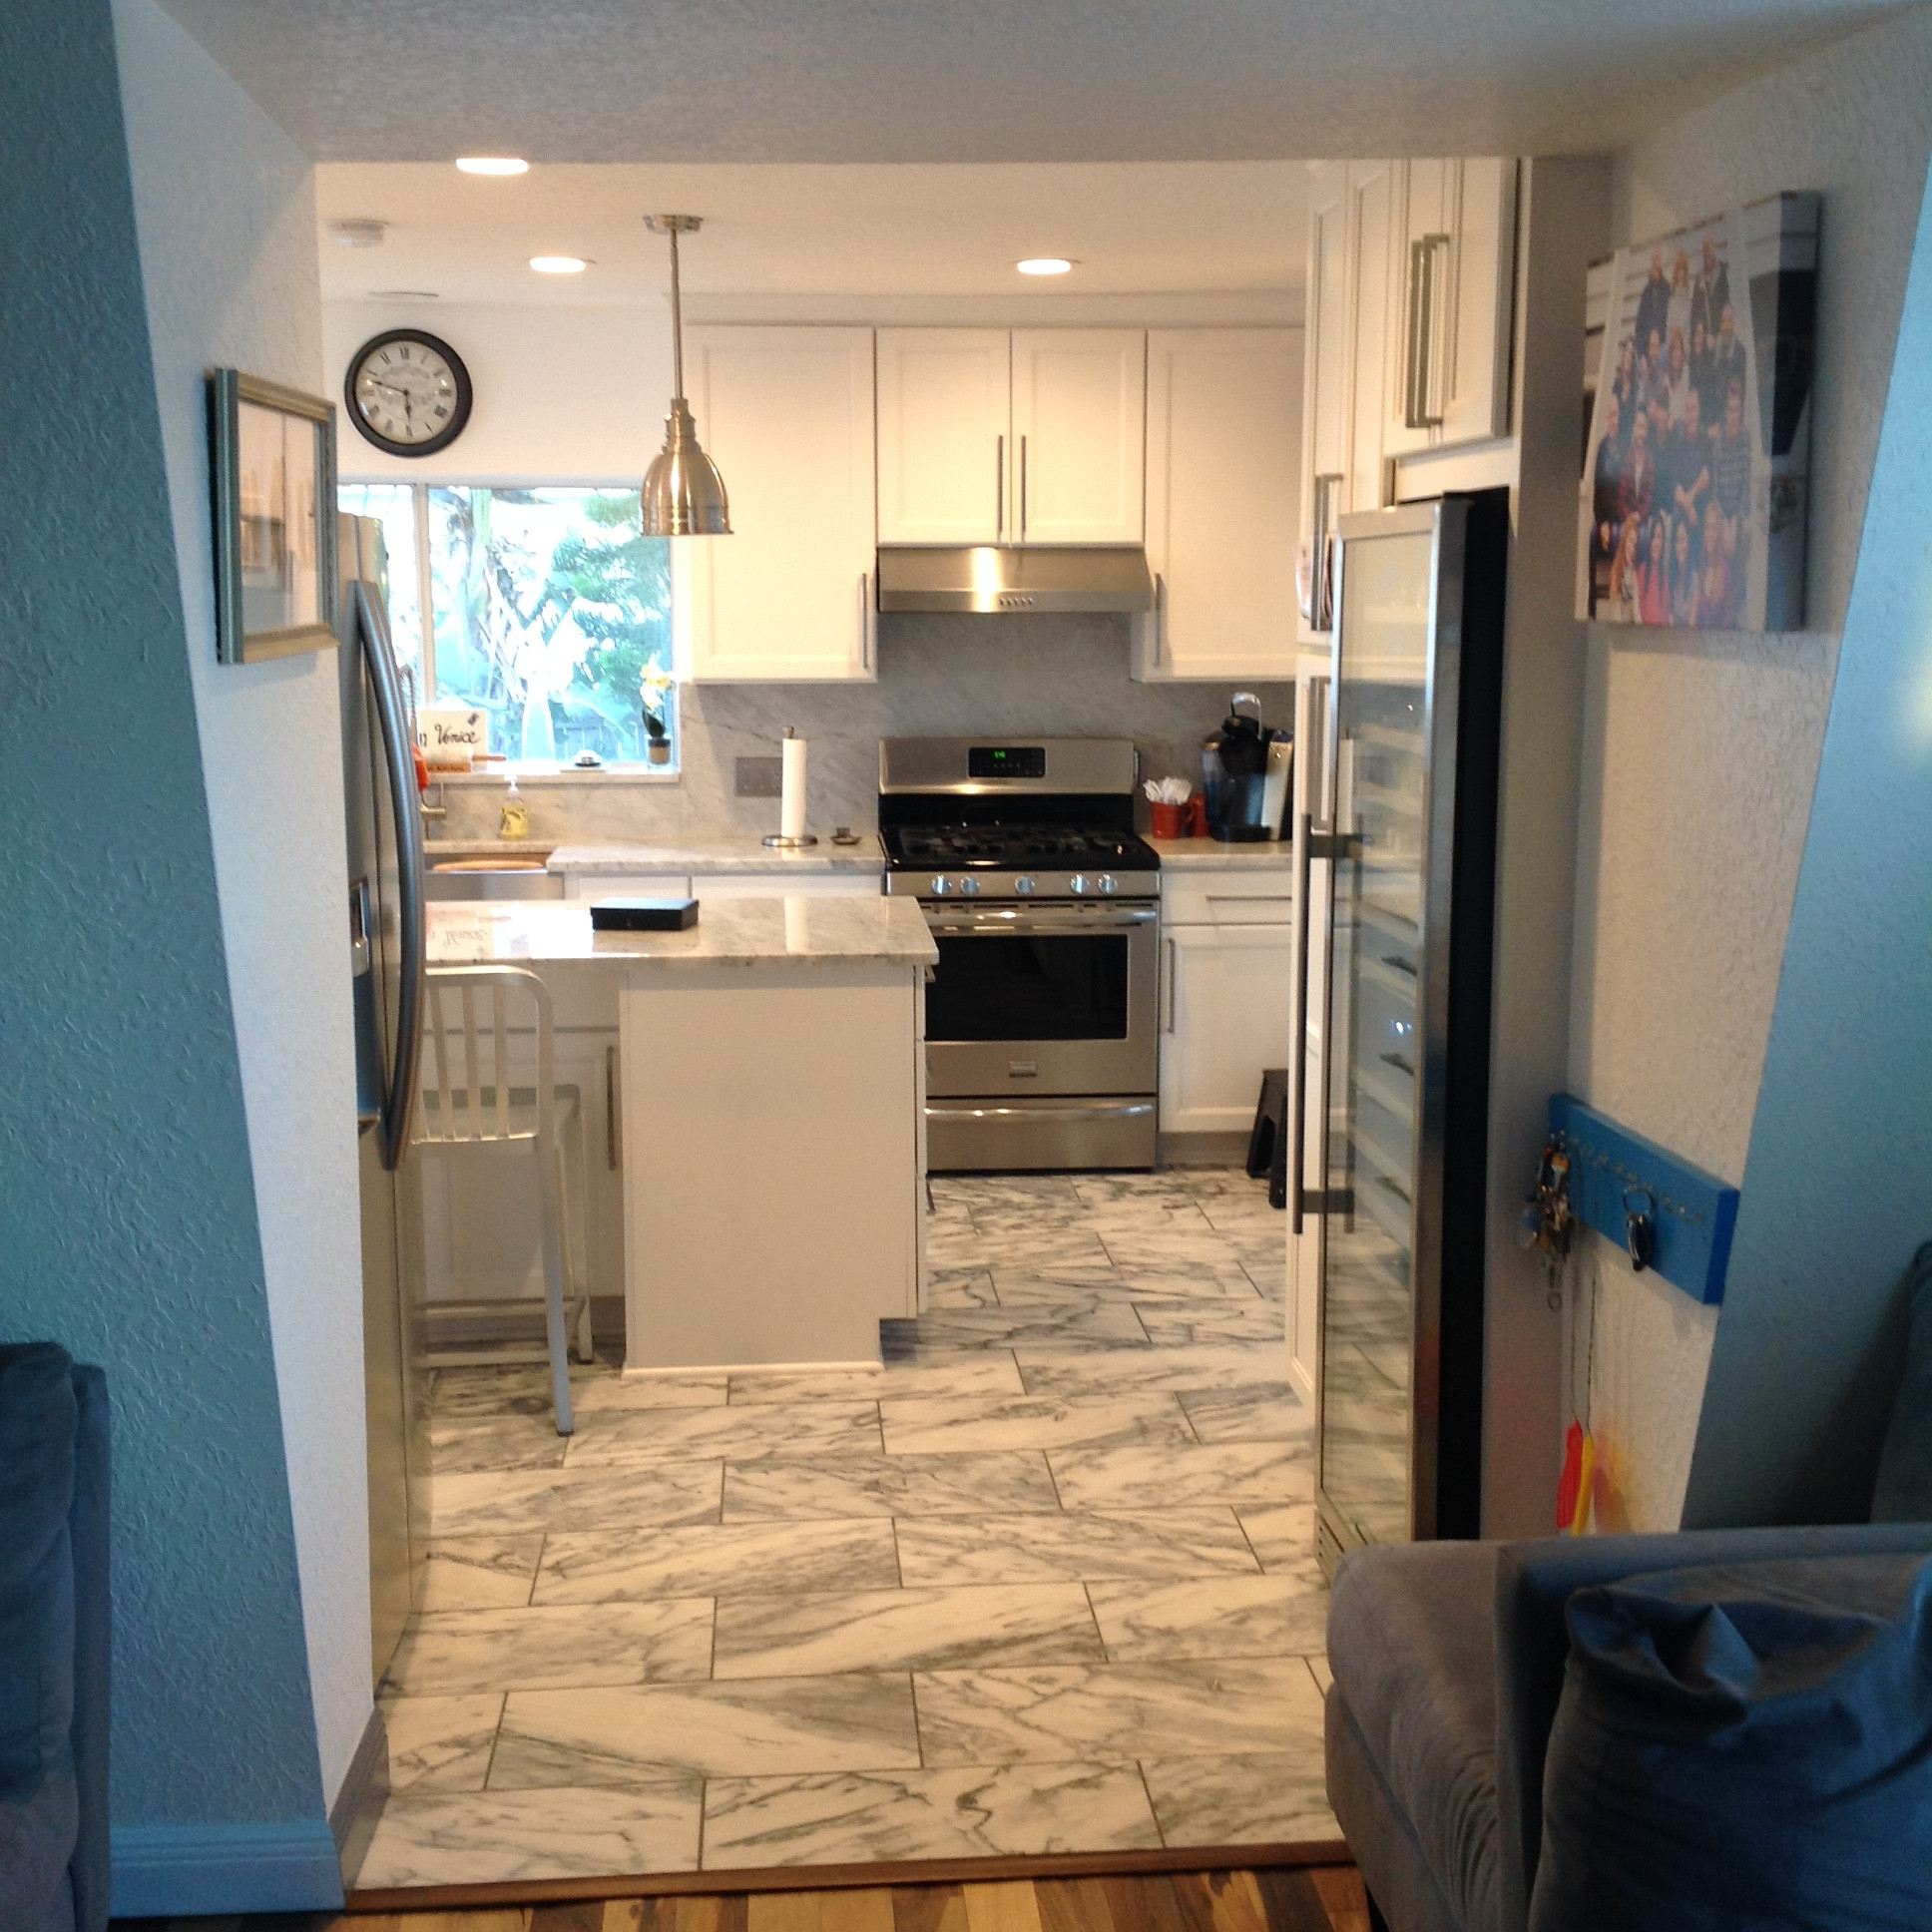 Living Rm view - Kitchen Remodel